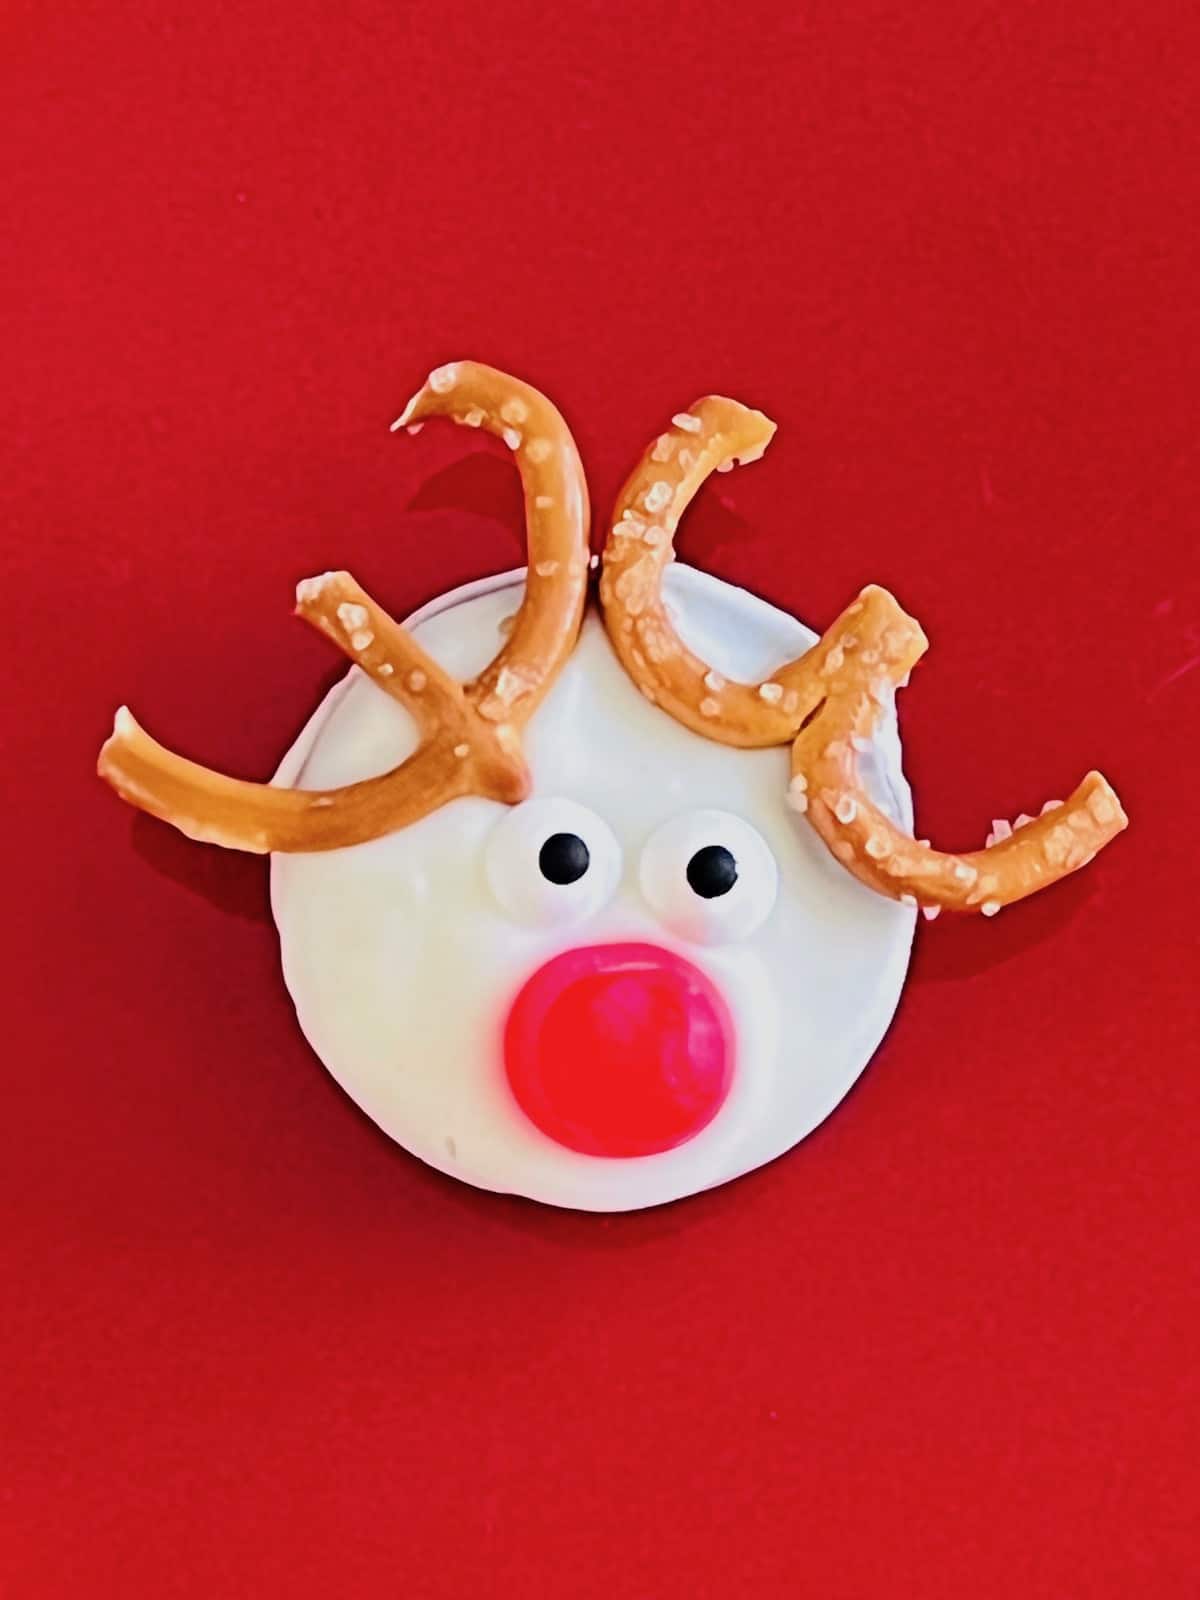 An Oreo cookie in white candy decorated like Rudolph the reindeer.